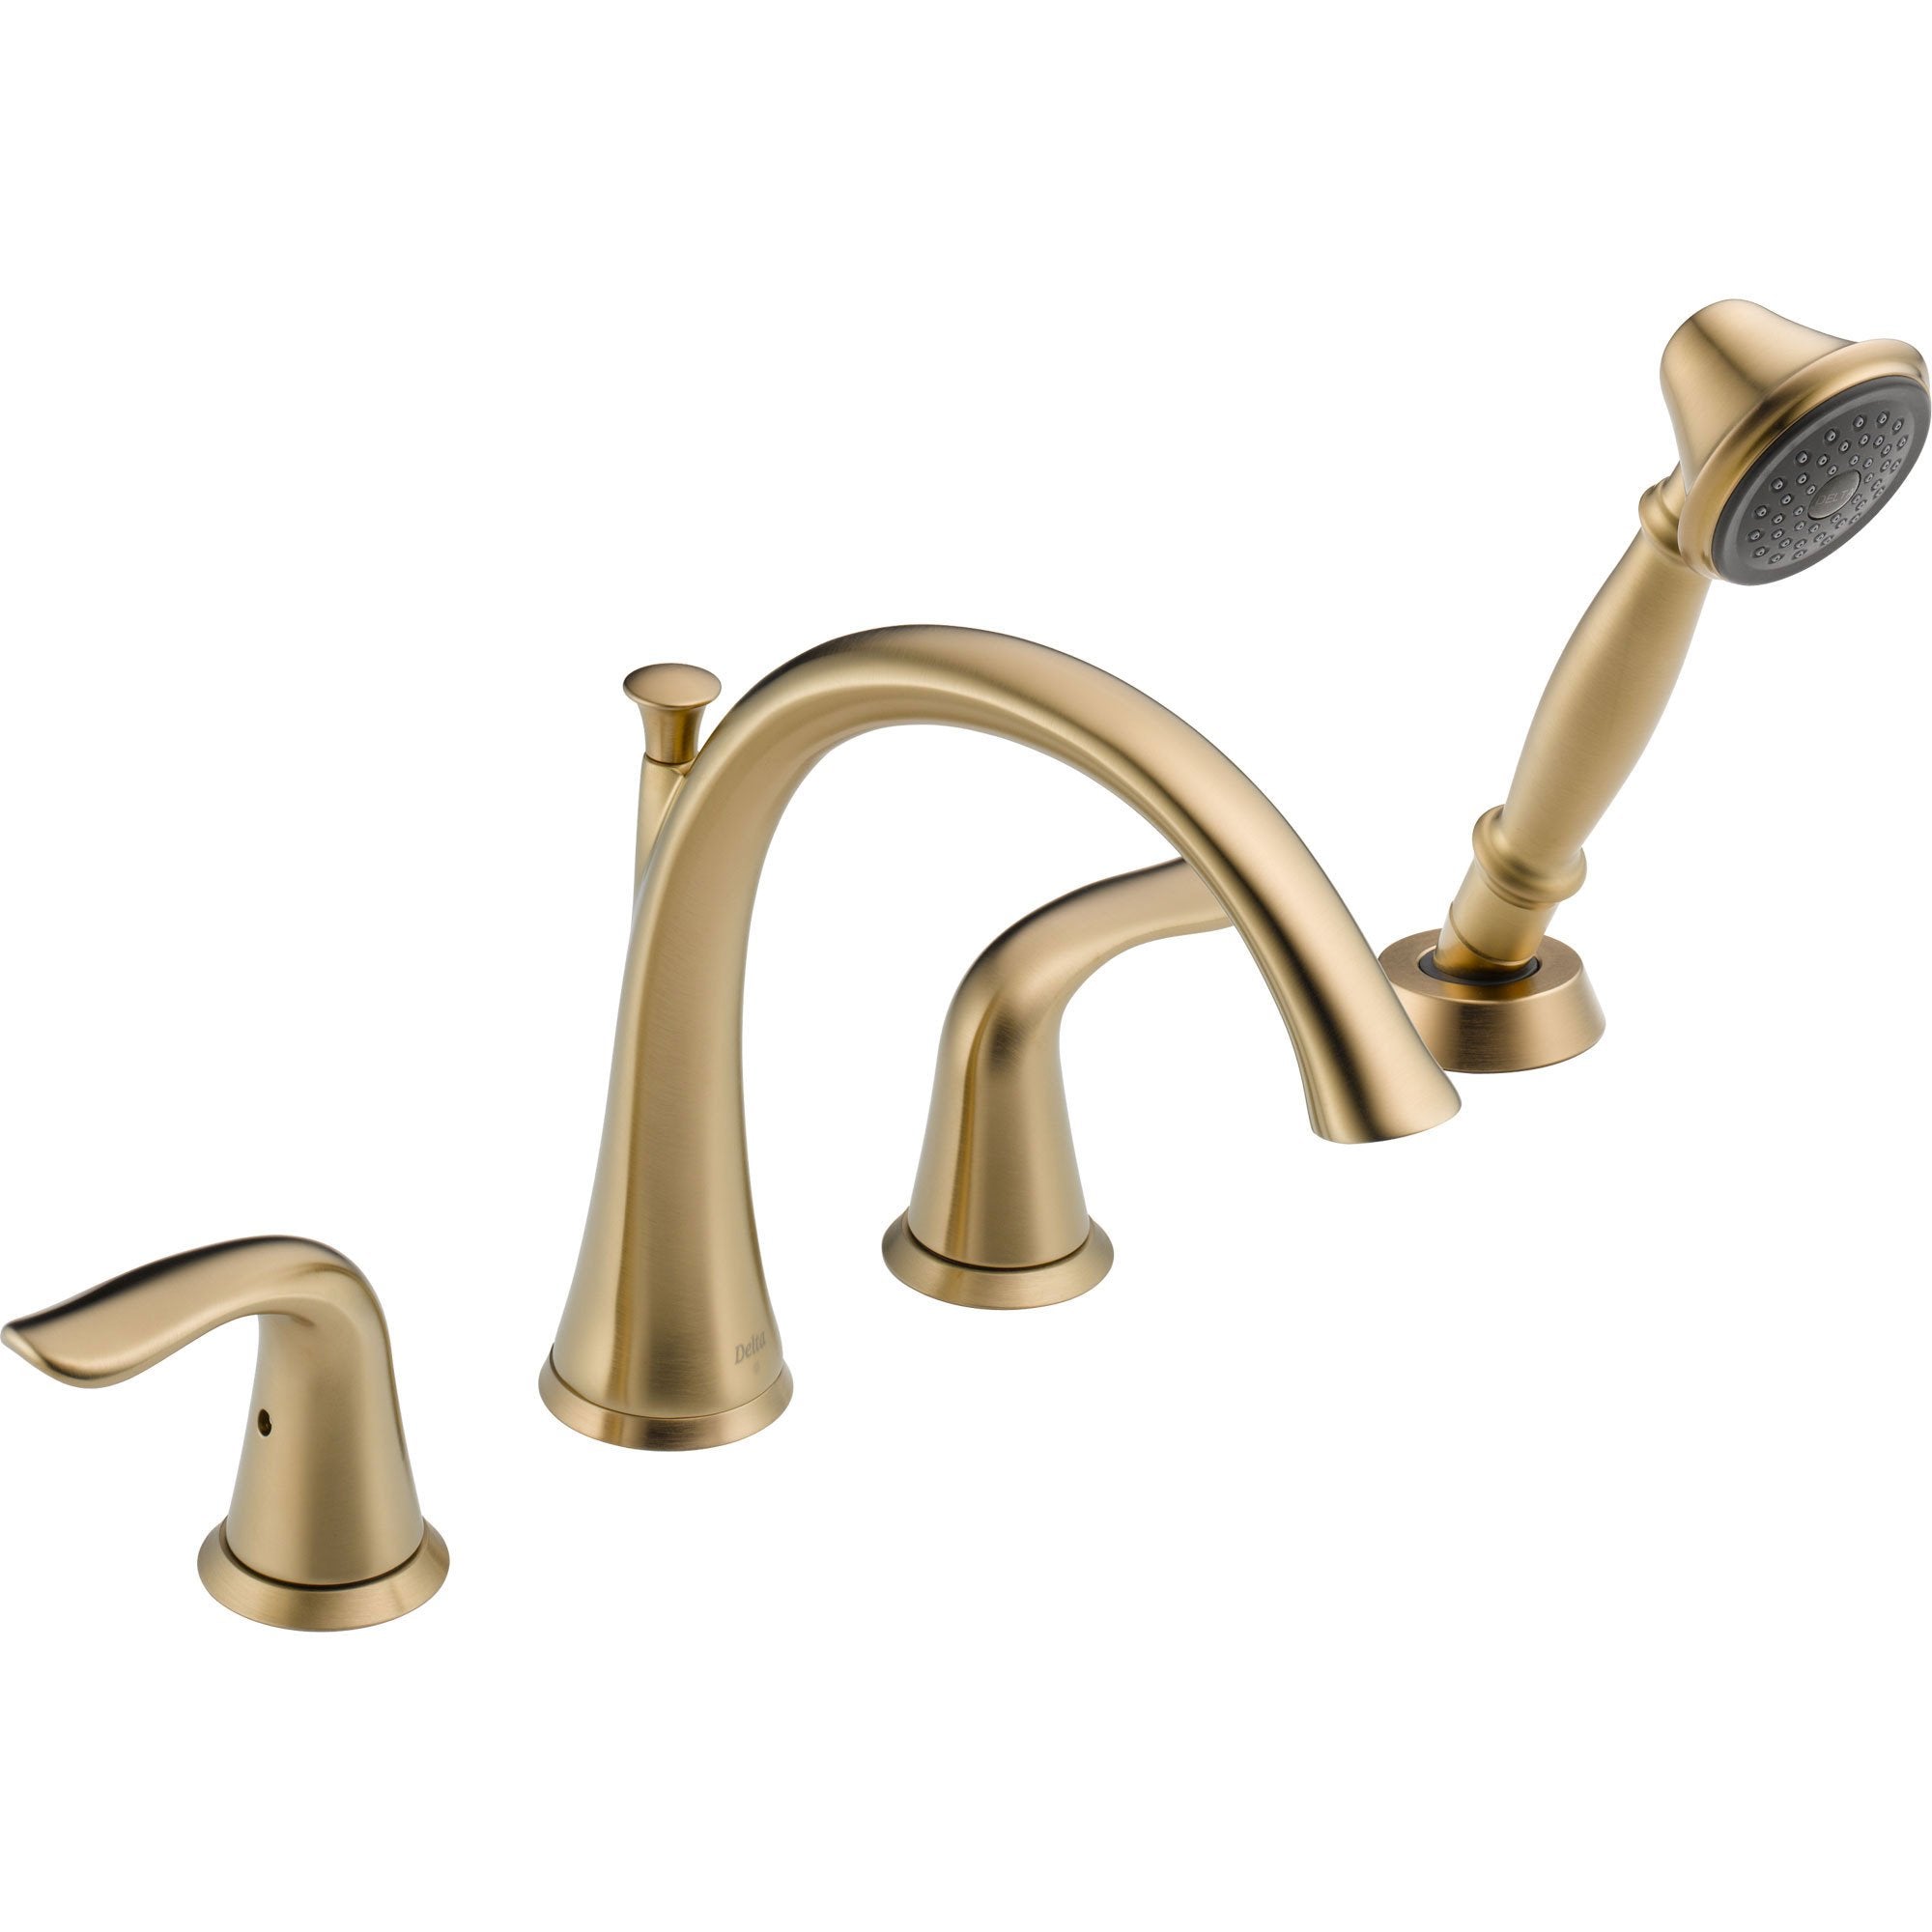 Delta Lahara Champagne Bronze Roman Tub Faucet with Handshower and Valve D860V